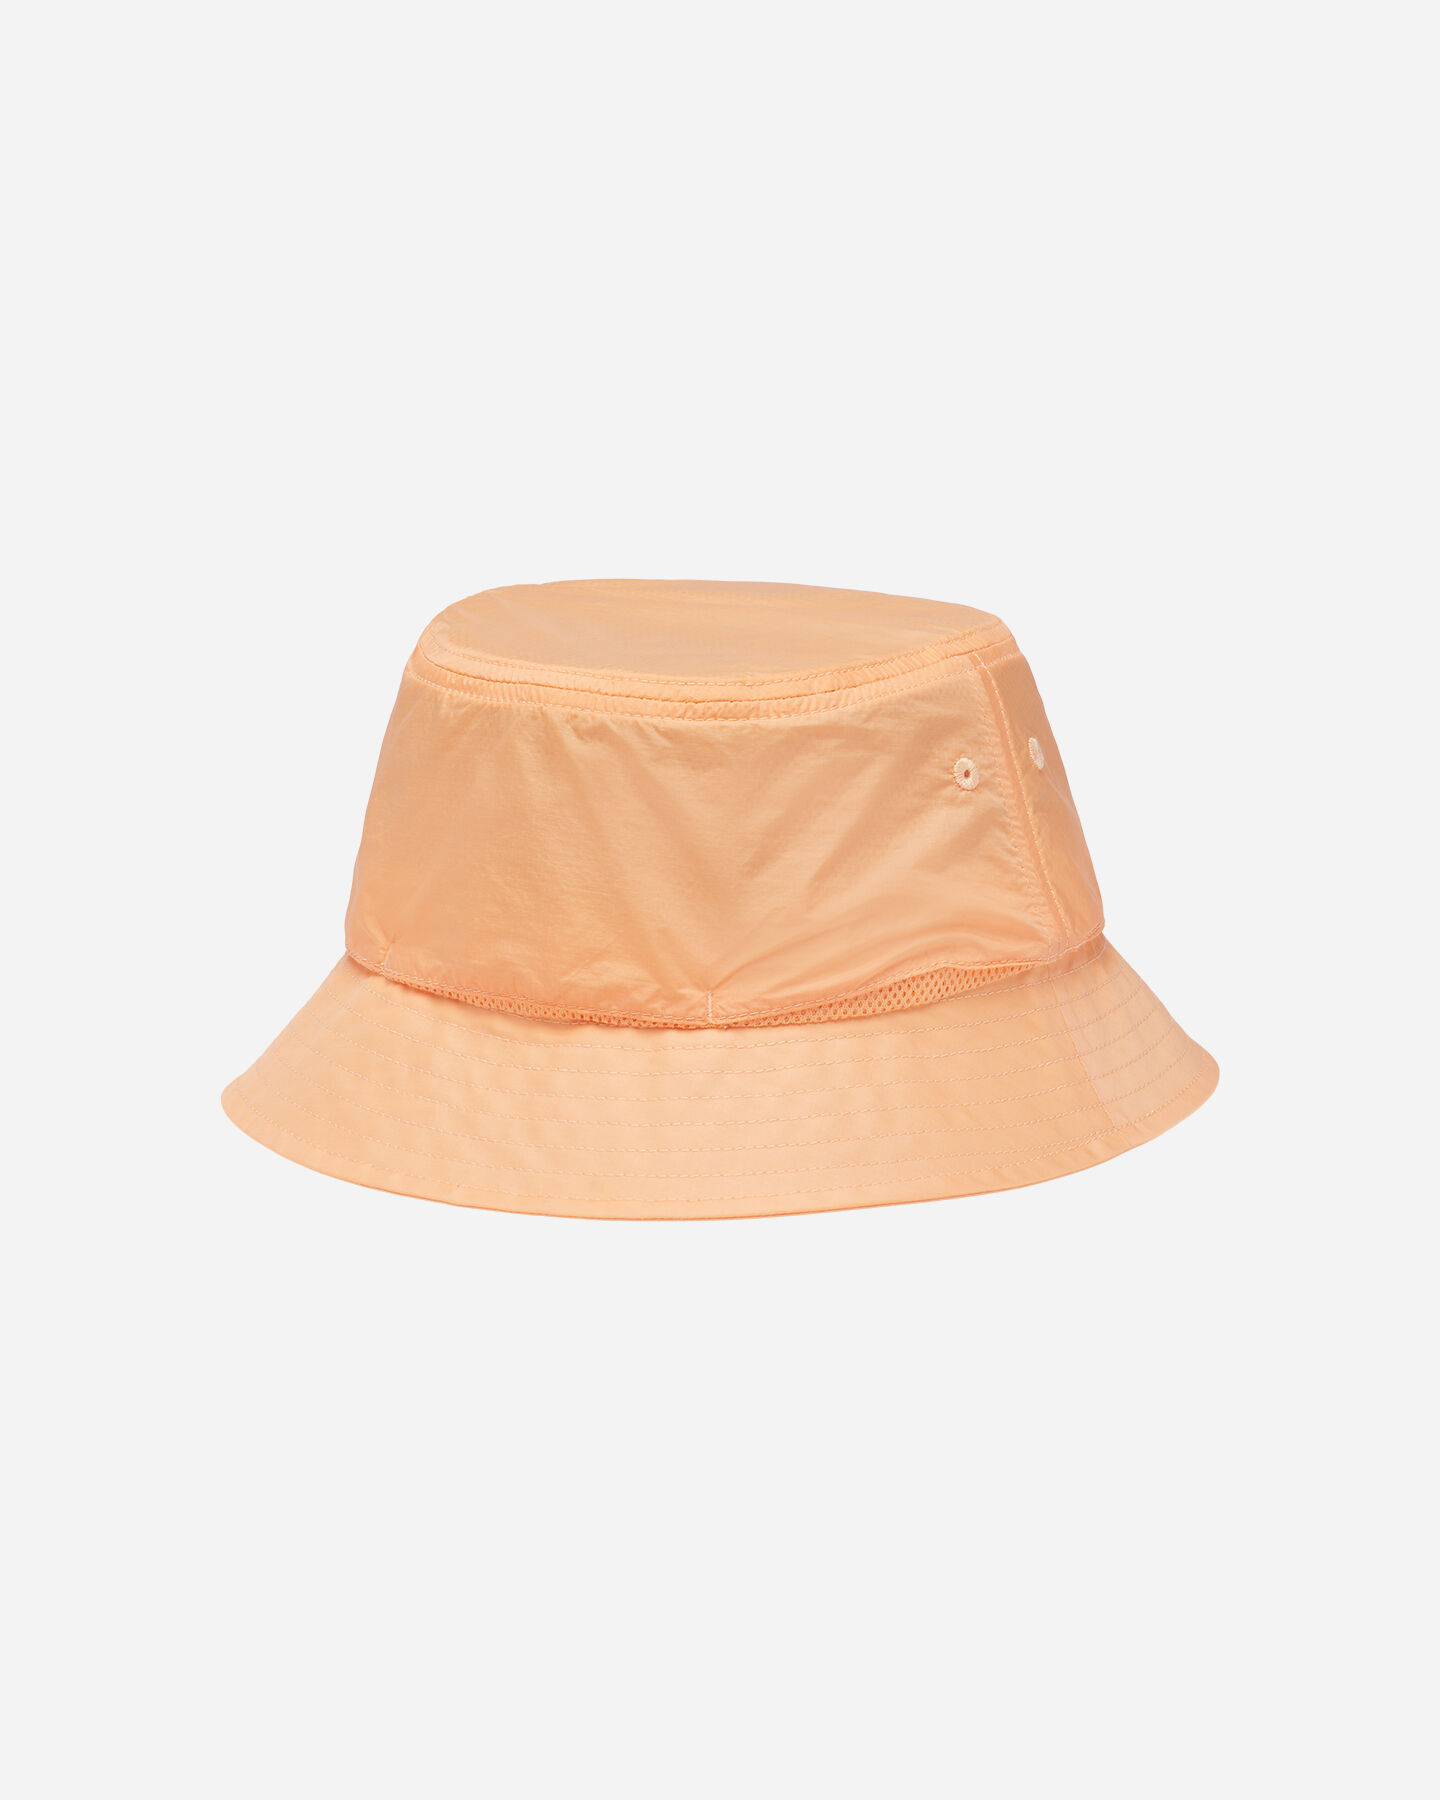  Cappellino COLUMBIA PUNCHBOWL  S5553138|812|S/M scatto 1